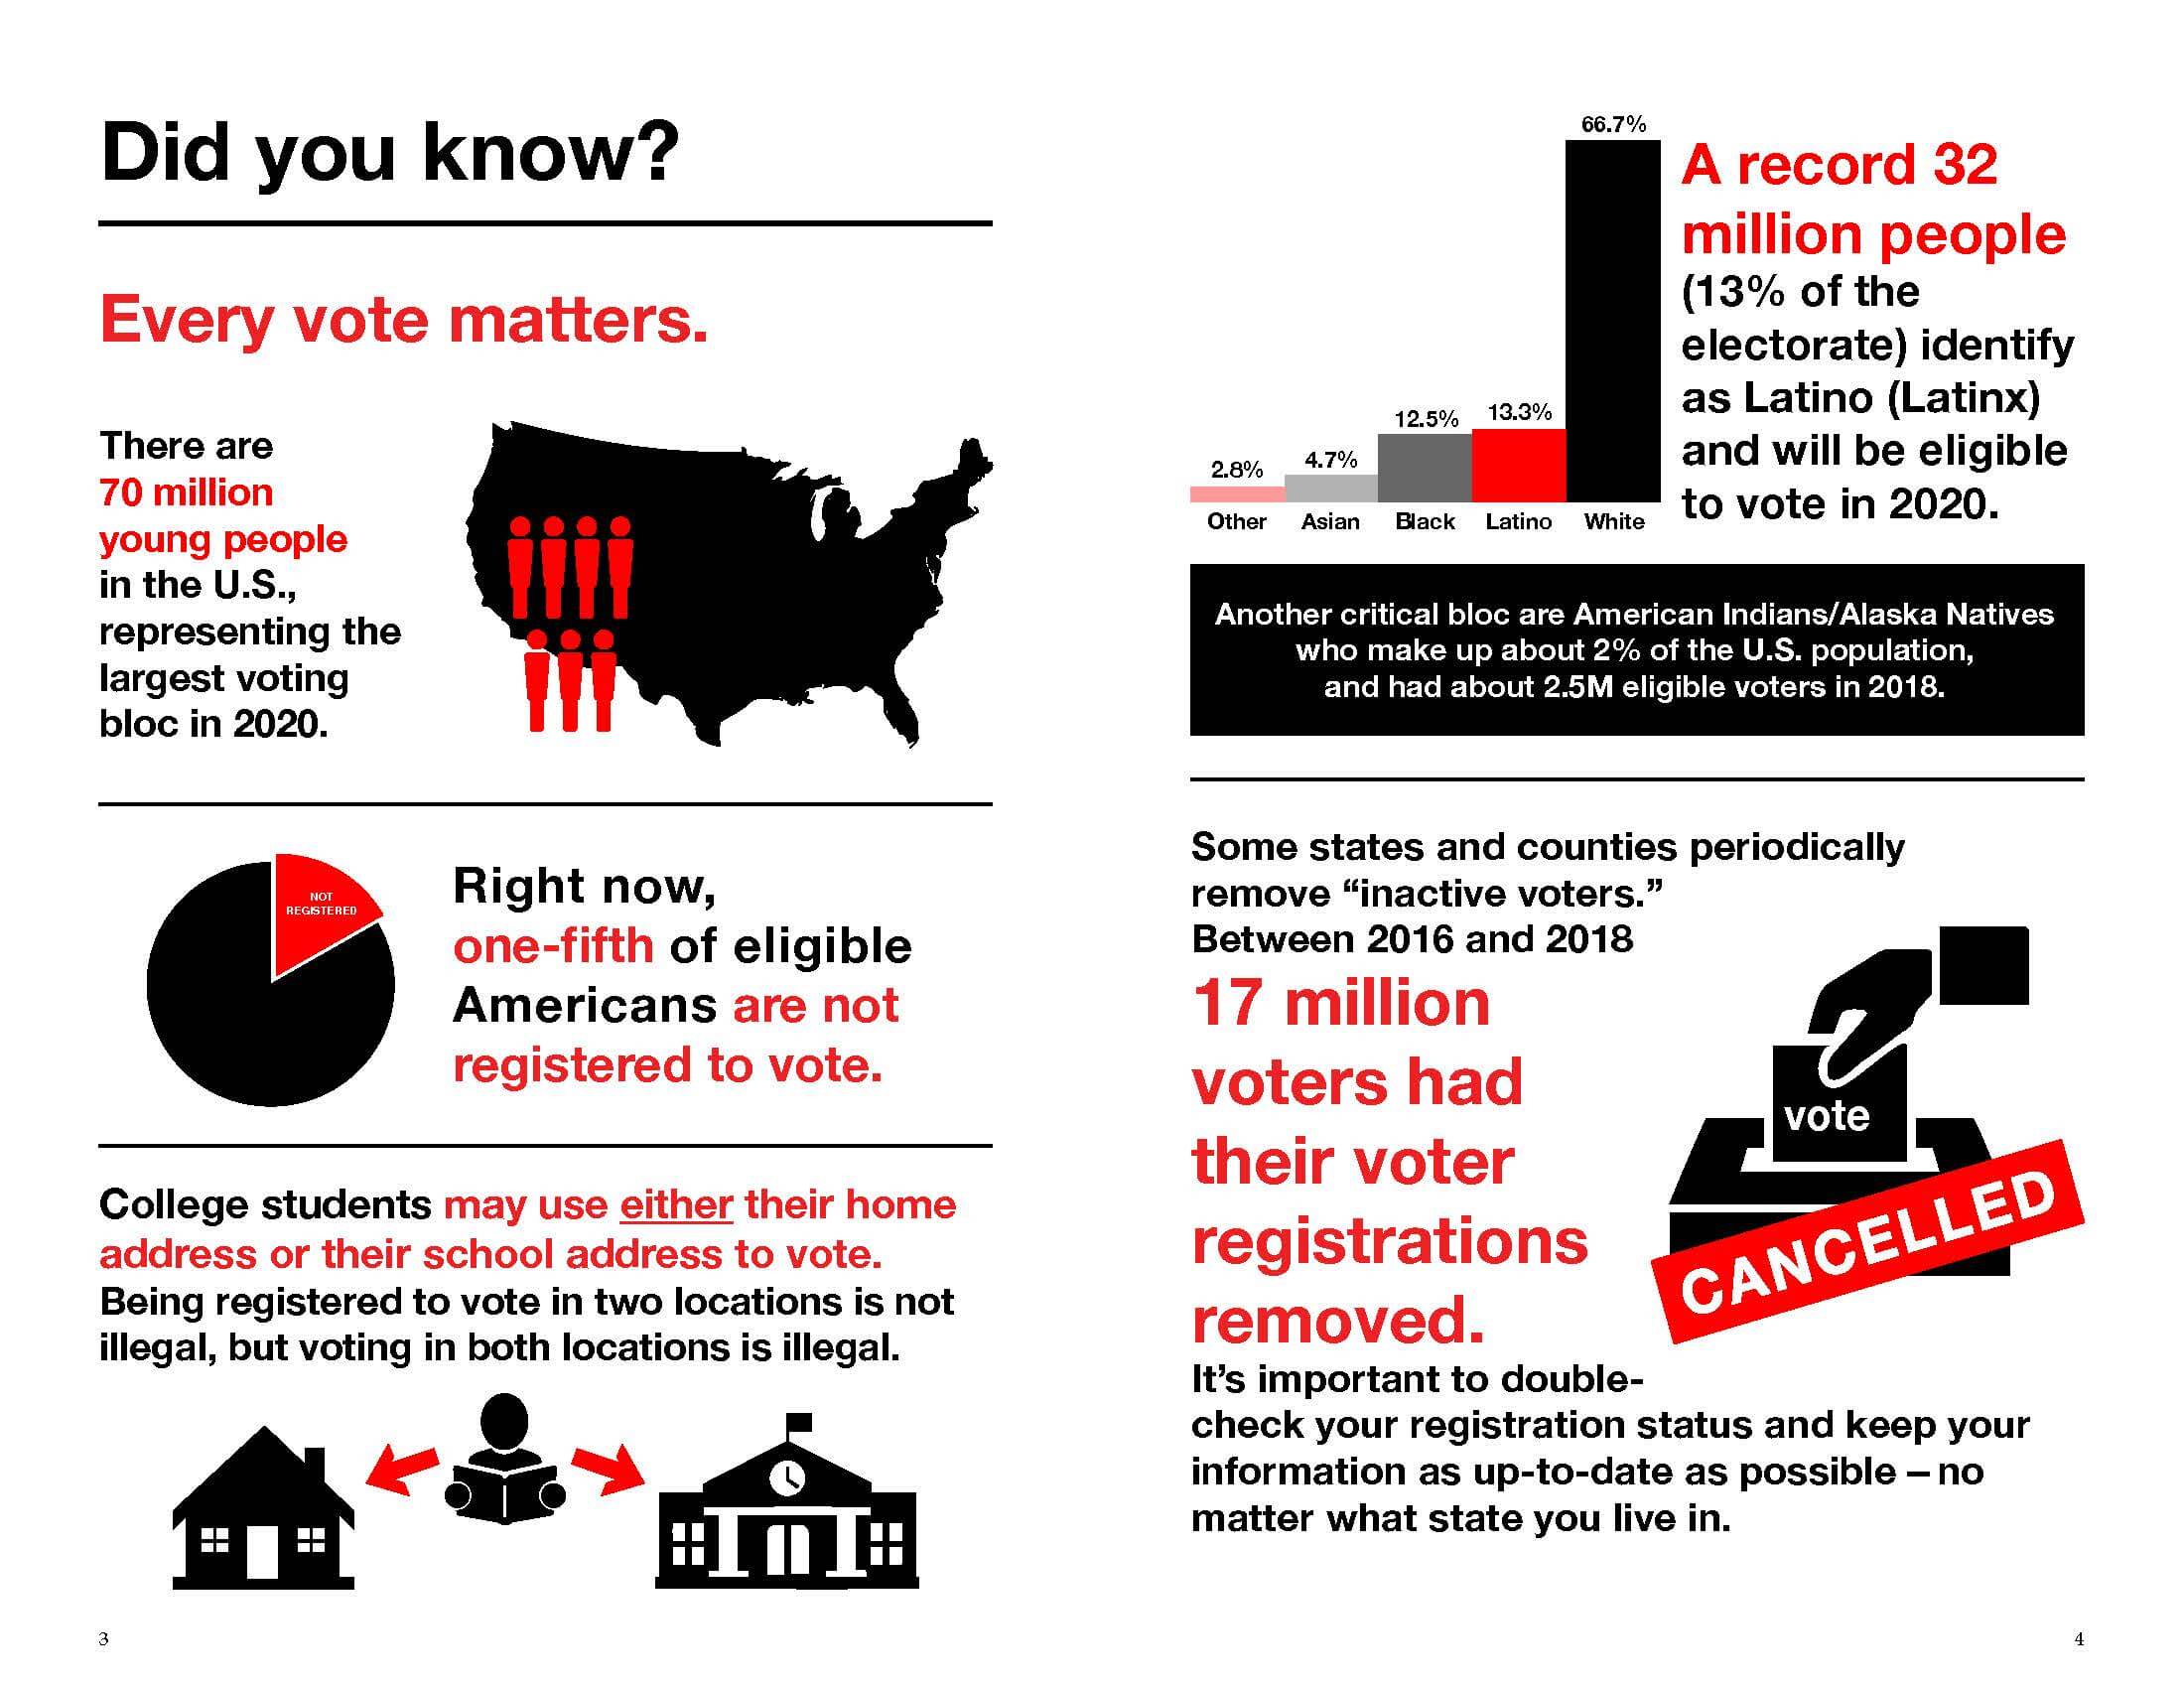 Nike - Voter Resources